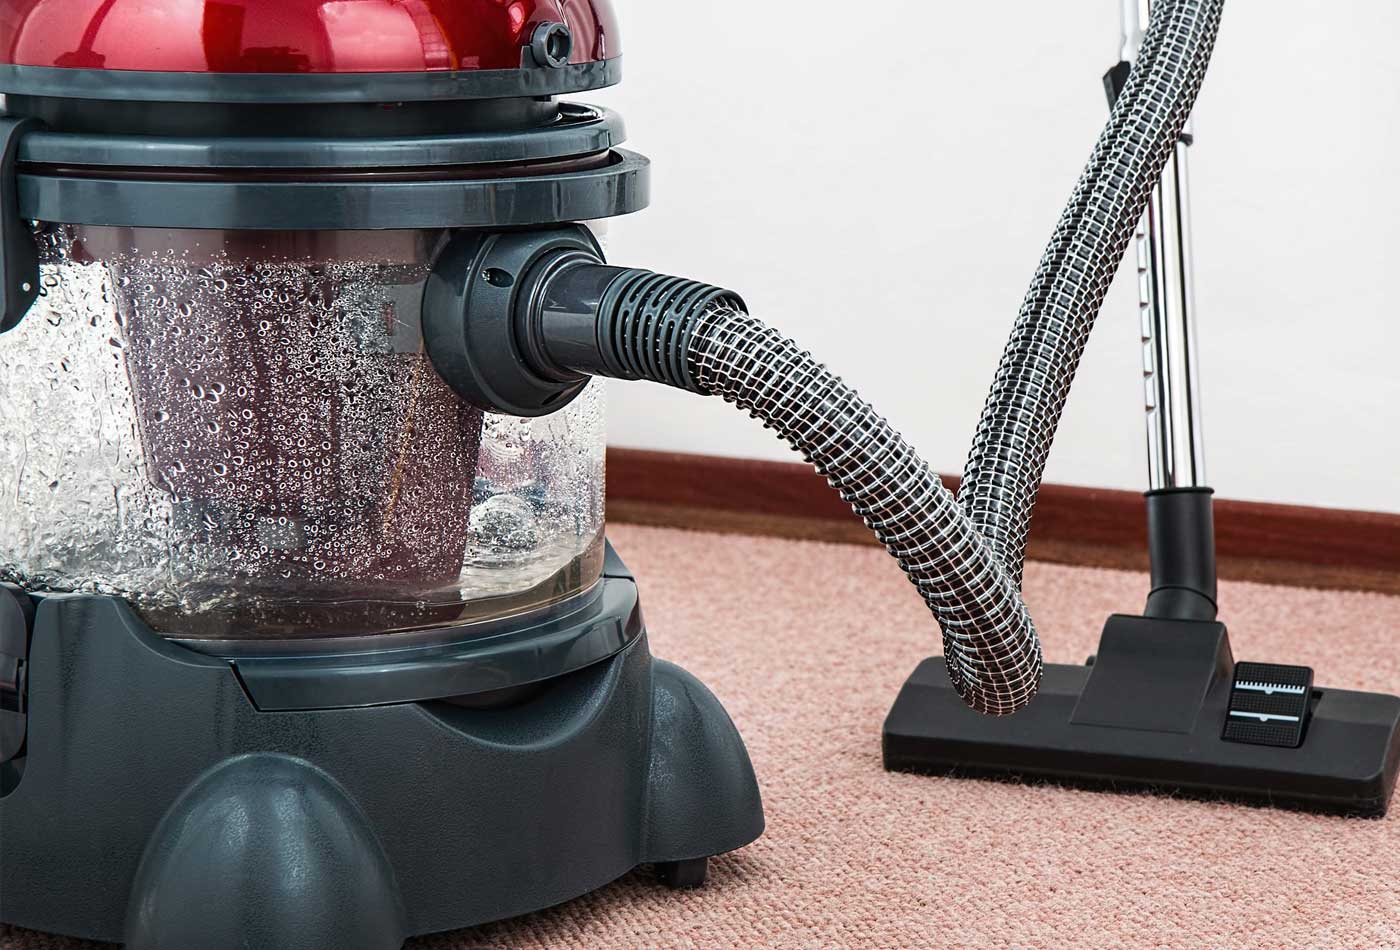 Cleaner insurance - Shows a carpet cleaning machine